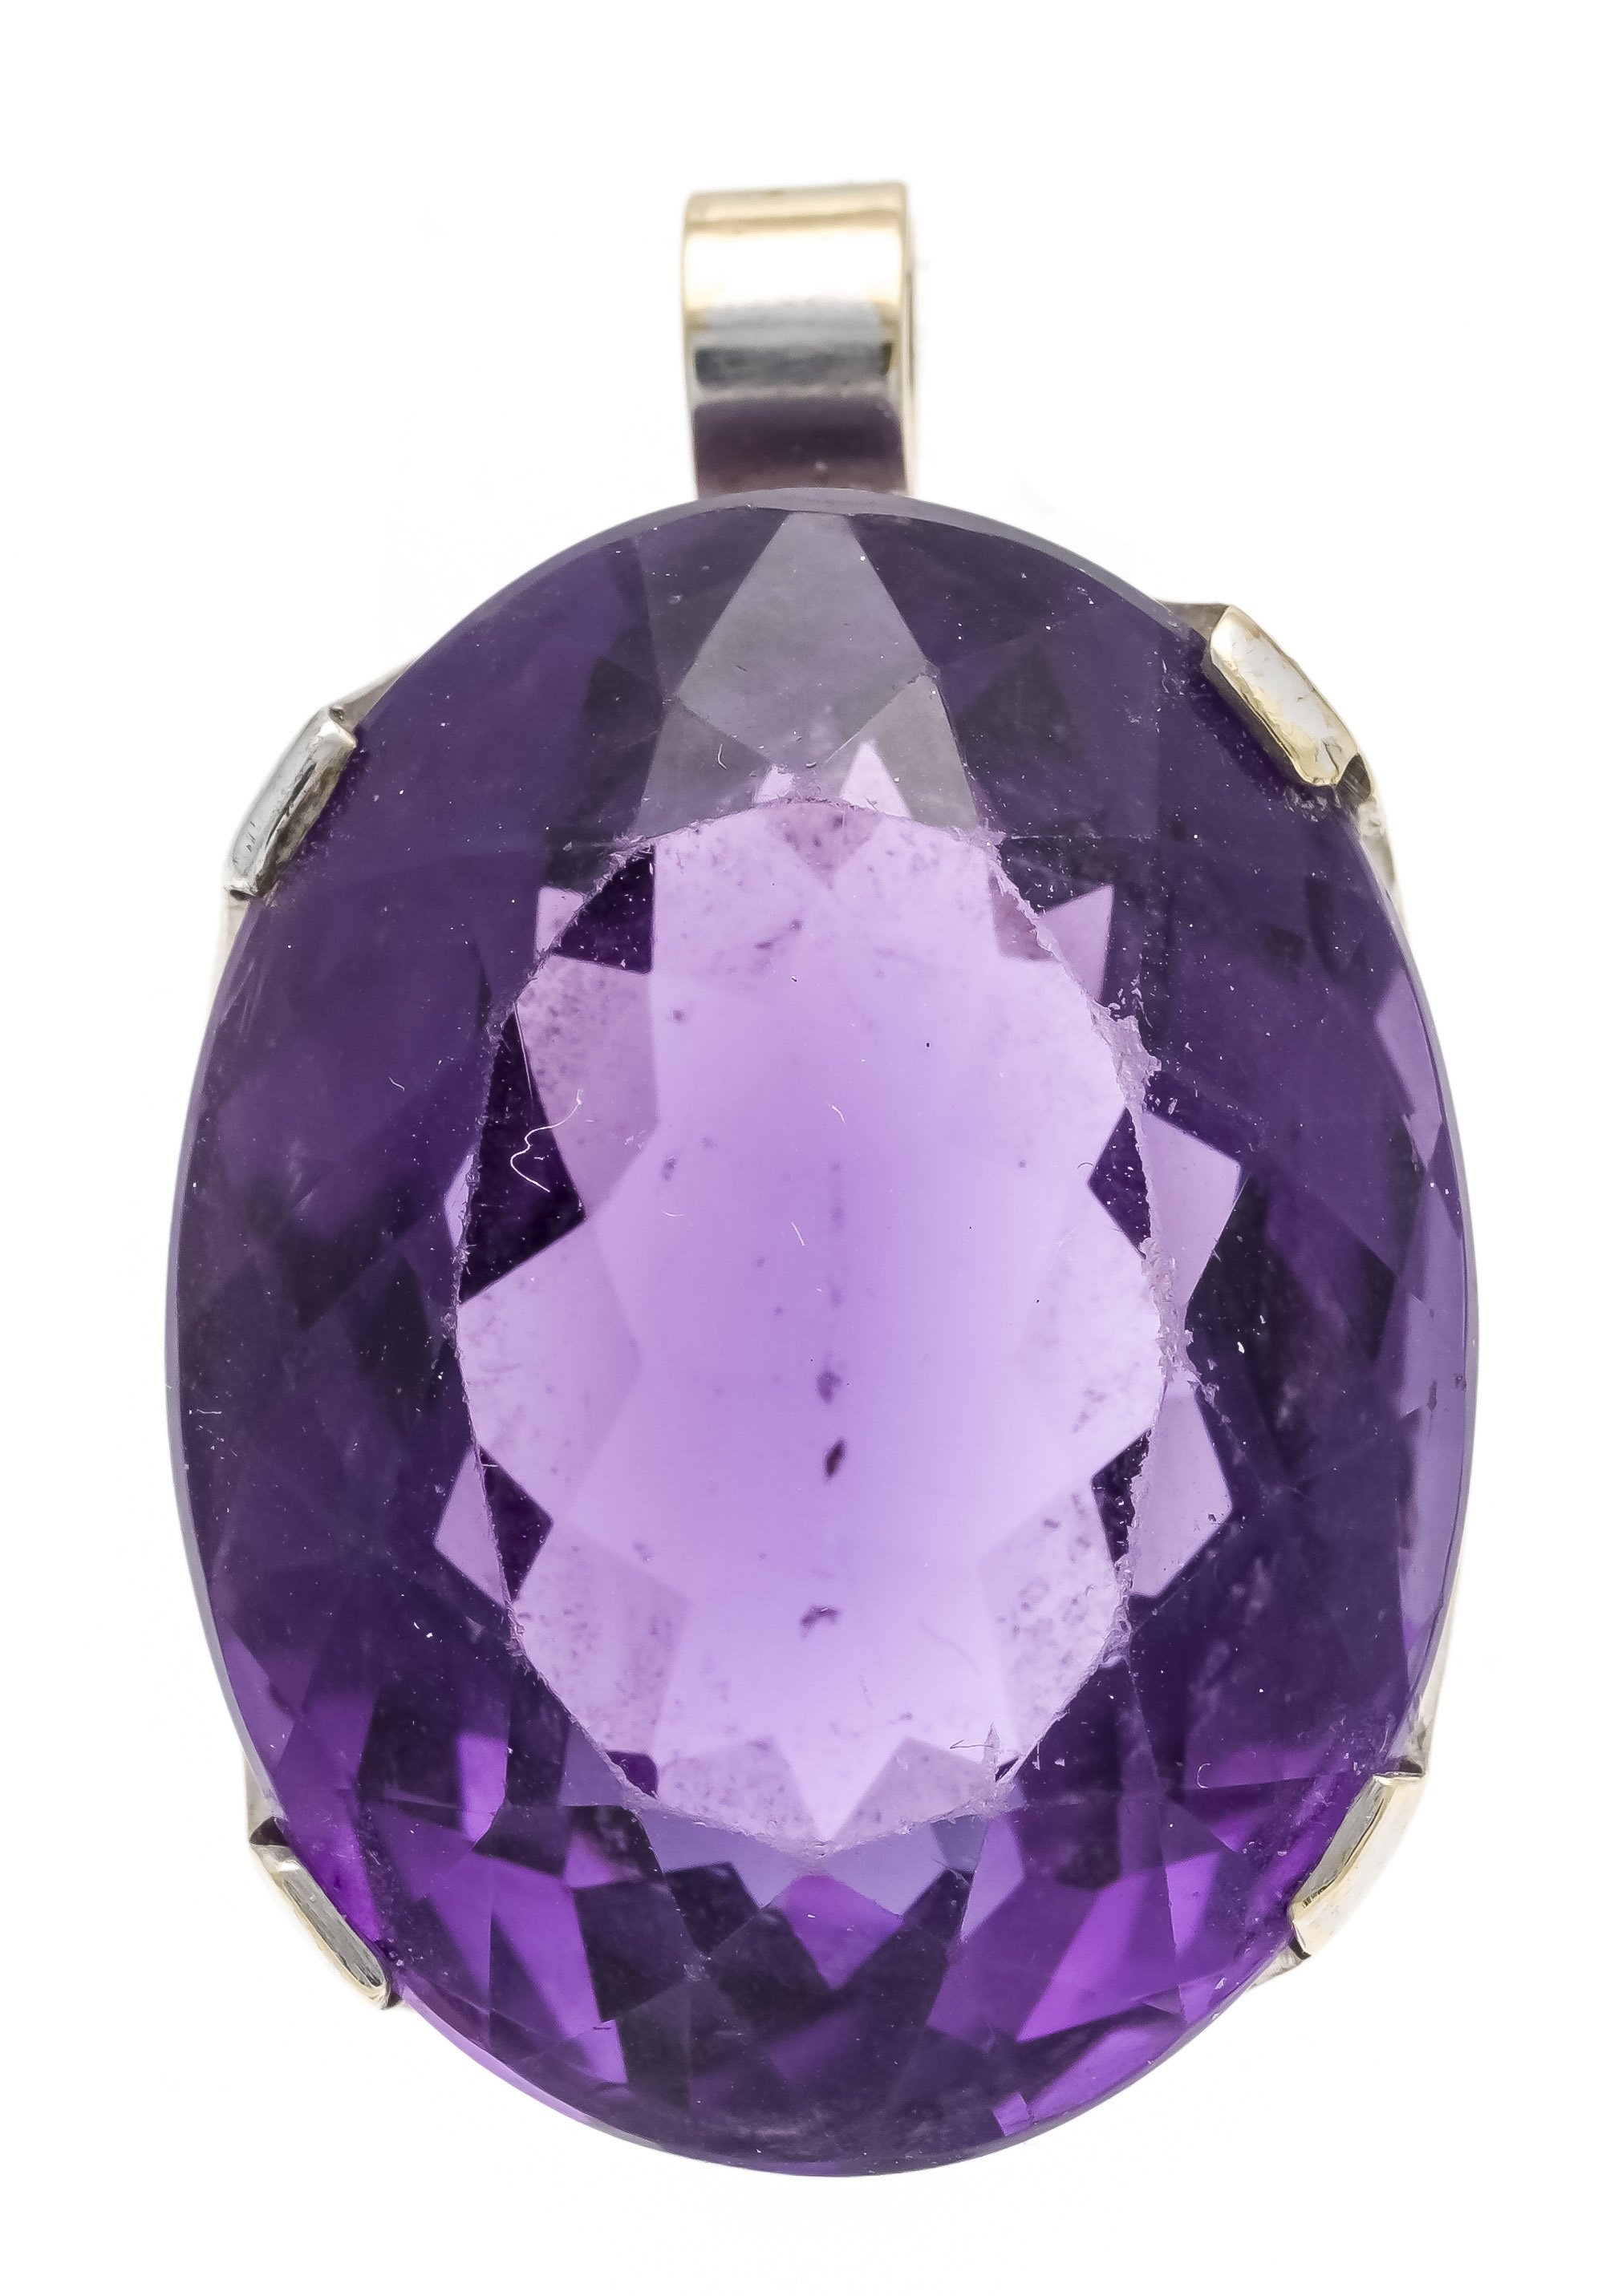 Amethyst pendant WG 585/000 unstamped, tested, with an oval faceted amethyst 26 x 21 mm, l. 32 mm,